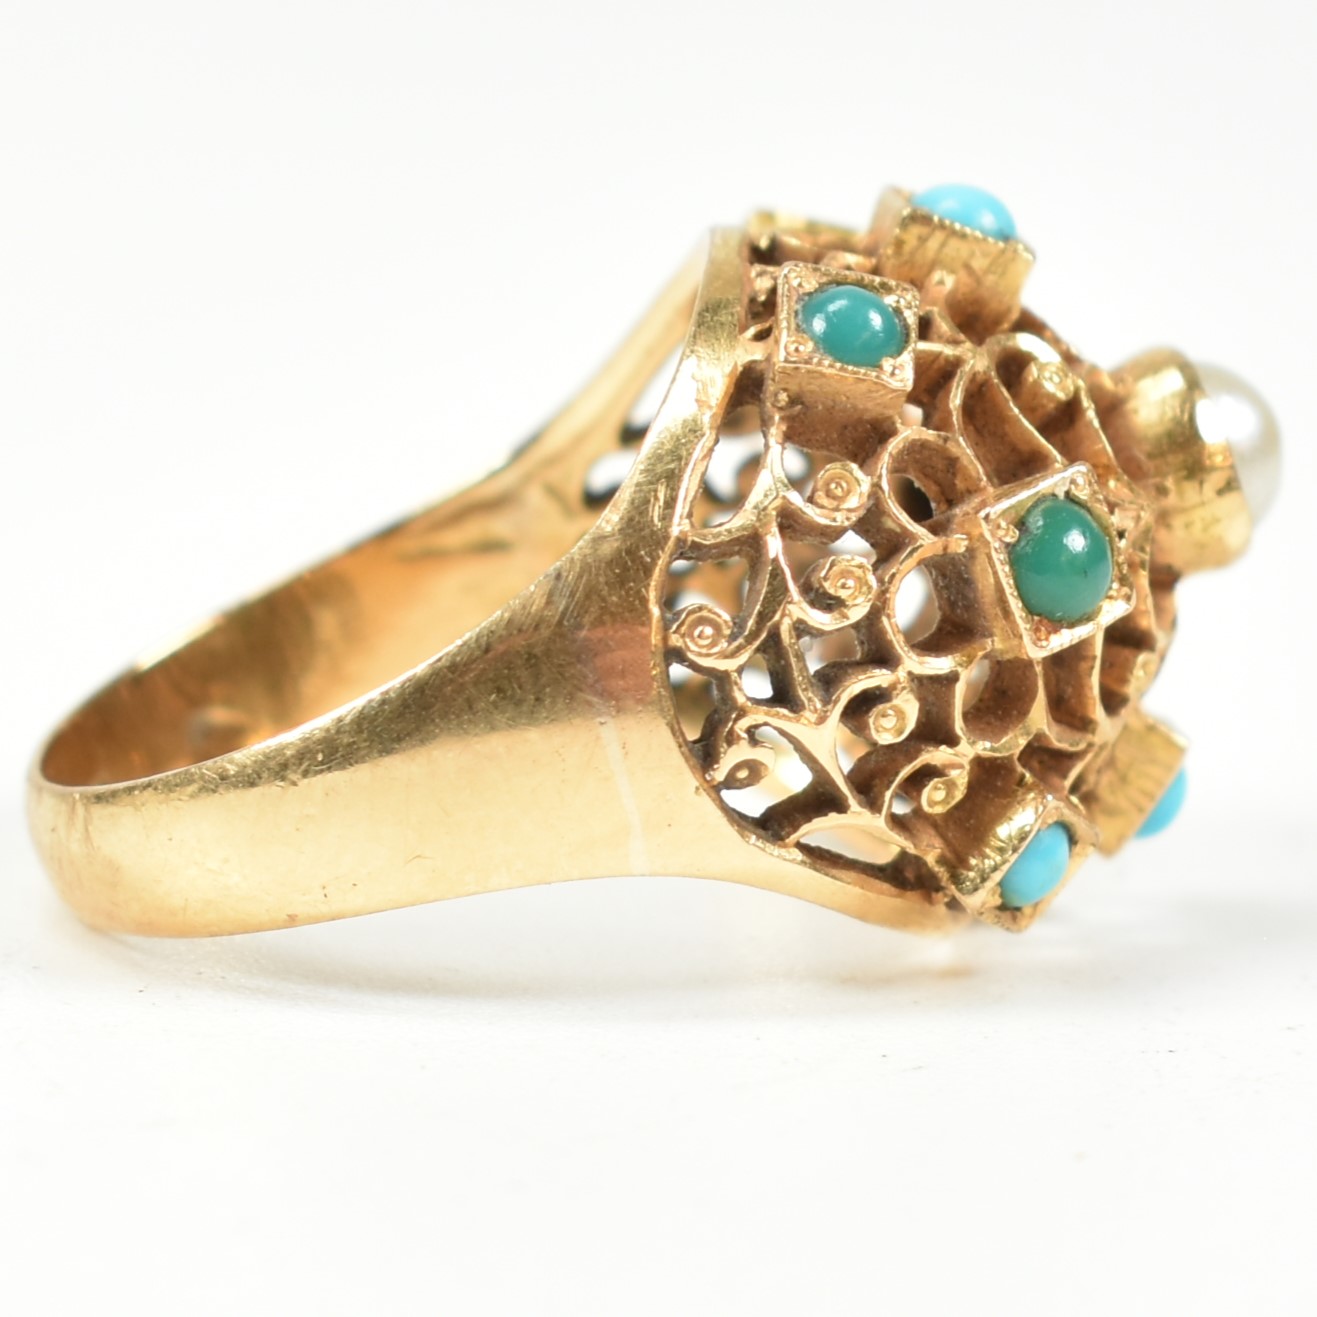 18CT GOLD & TURQUOISE BOMBE RING - Image 4 of 10